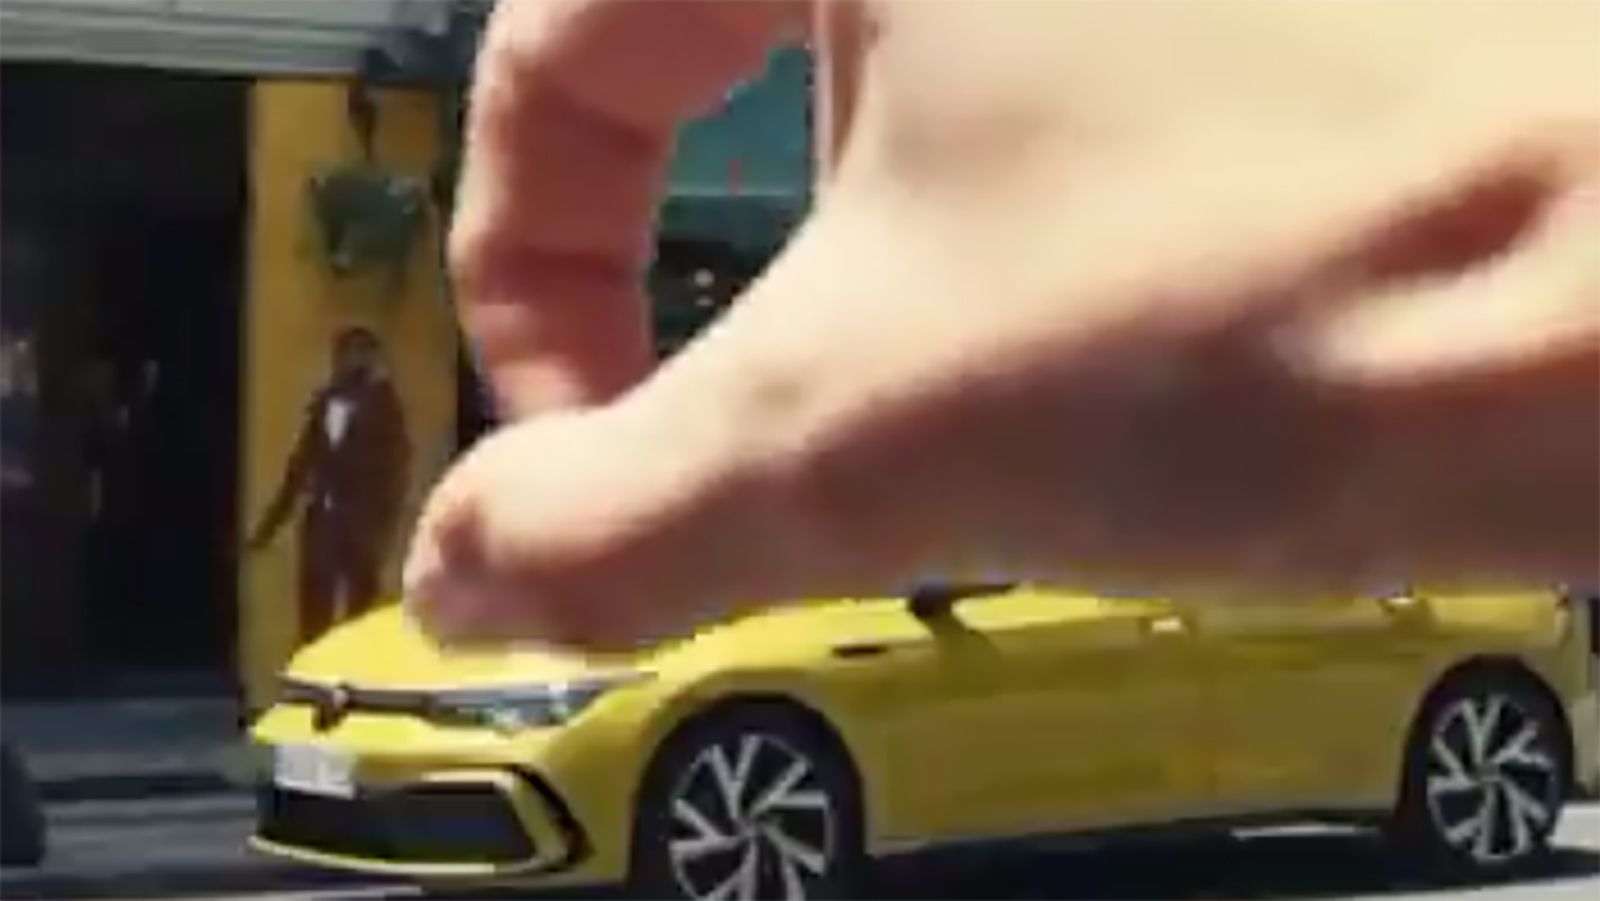 Volkswagen apologizes for racist Instagram ad